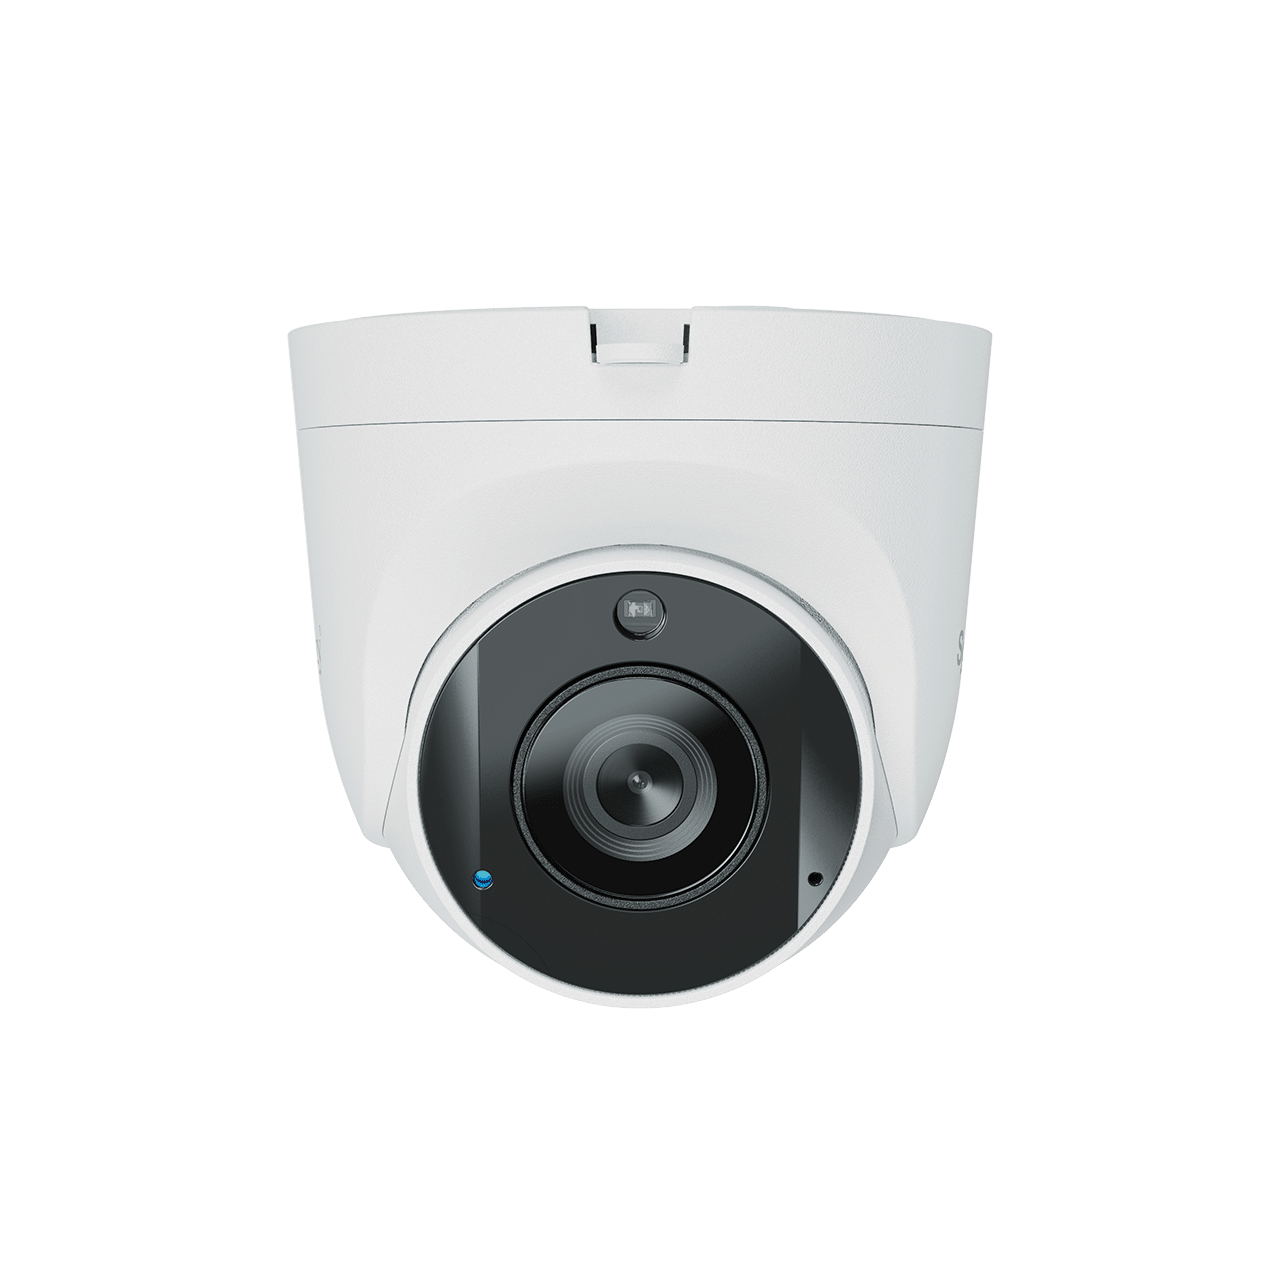 Synology BC500 TC500 Bullet and turret IP All-weather AI cameras